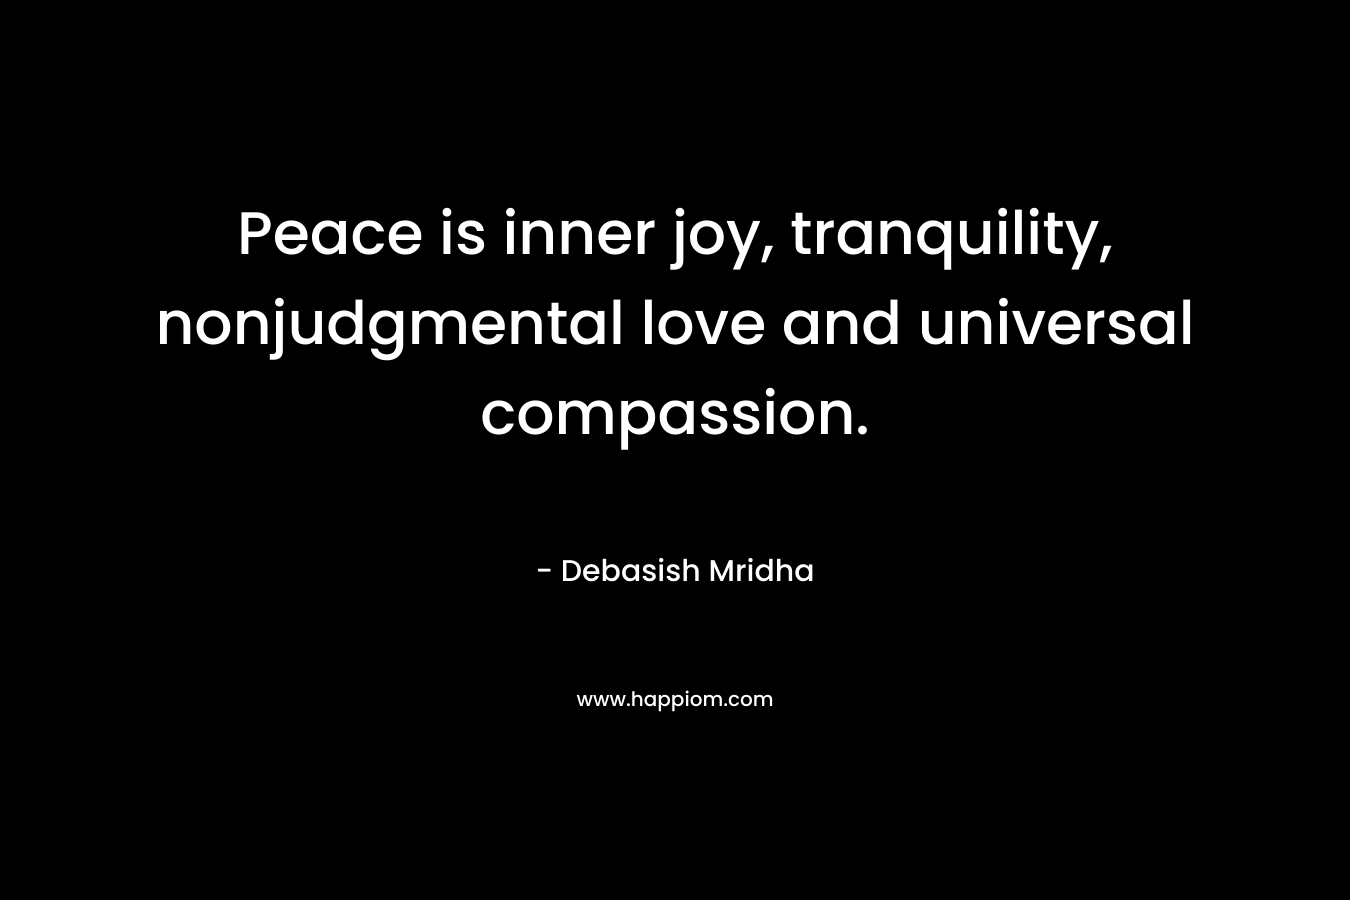 Peace is inner joy, tranquility, nonjudgmental love and universal compassion.